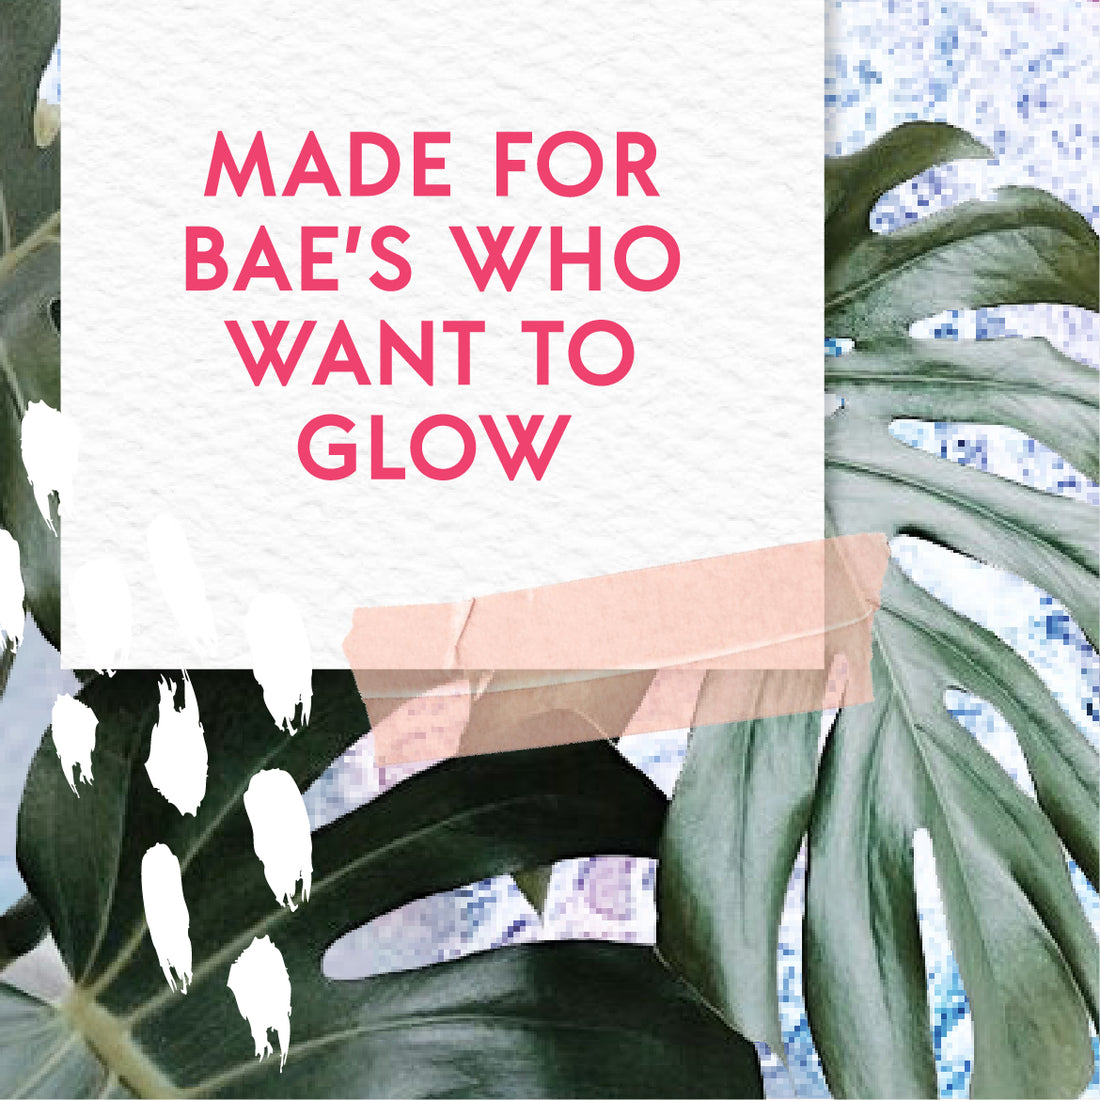 BAESKINCO GLOW MASK! Let me tell you what creates the magic in Baeskinco Glam mask